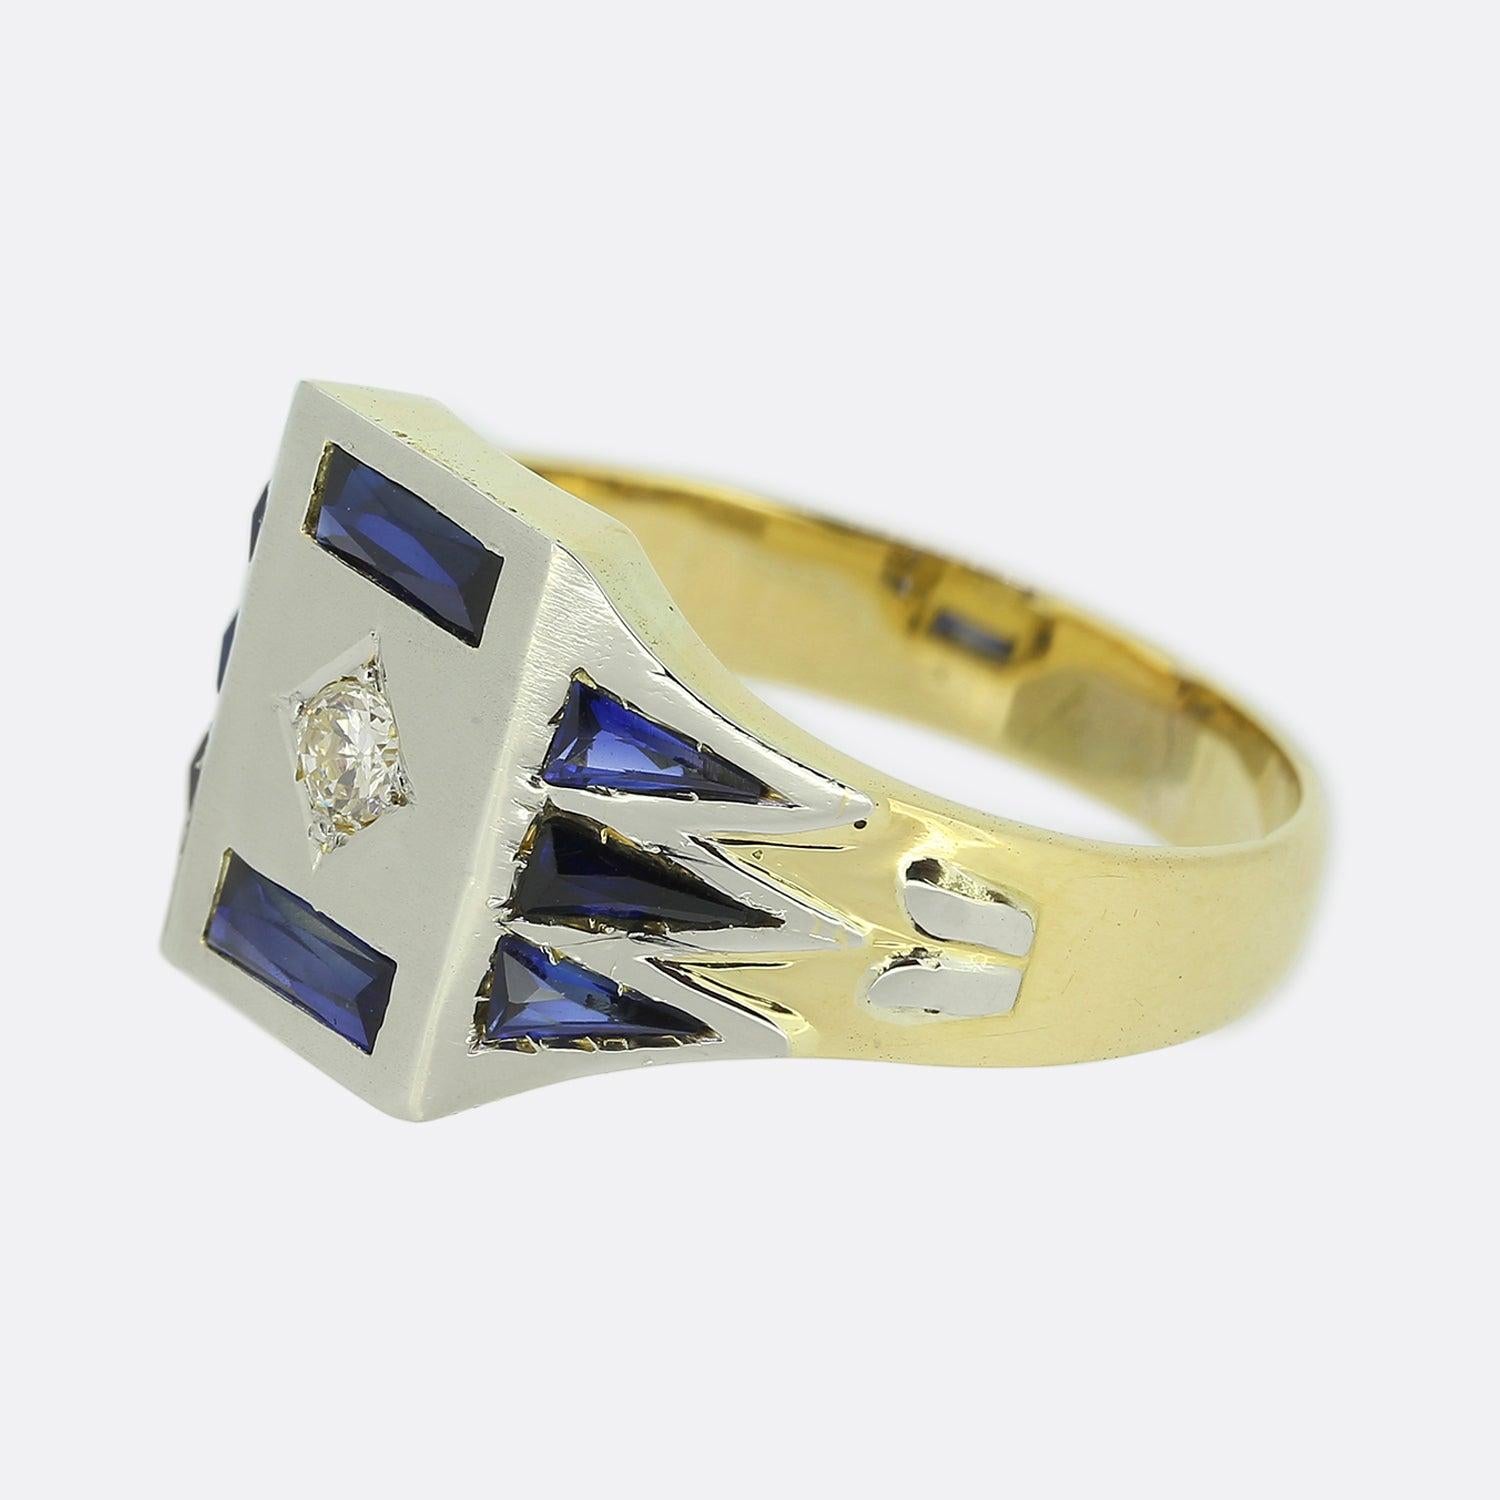 Here we have a marvellous sapphire and diamond signet ring crafted at a time when the Art Deco style was at the height of design. A single round faceted old European cut diamond sits at the centre of a rectangular platinum face with a single